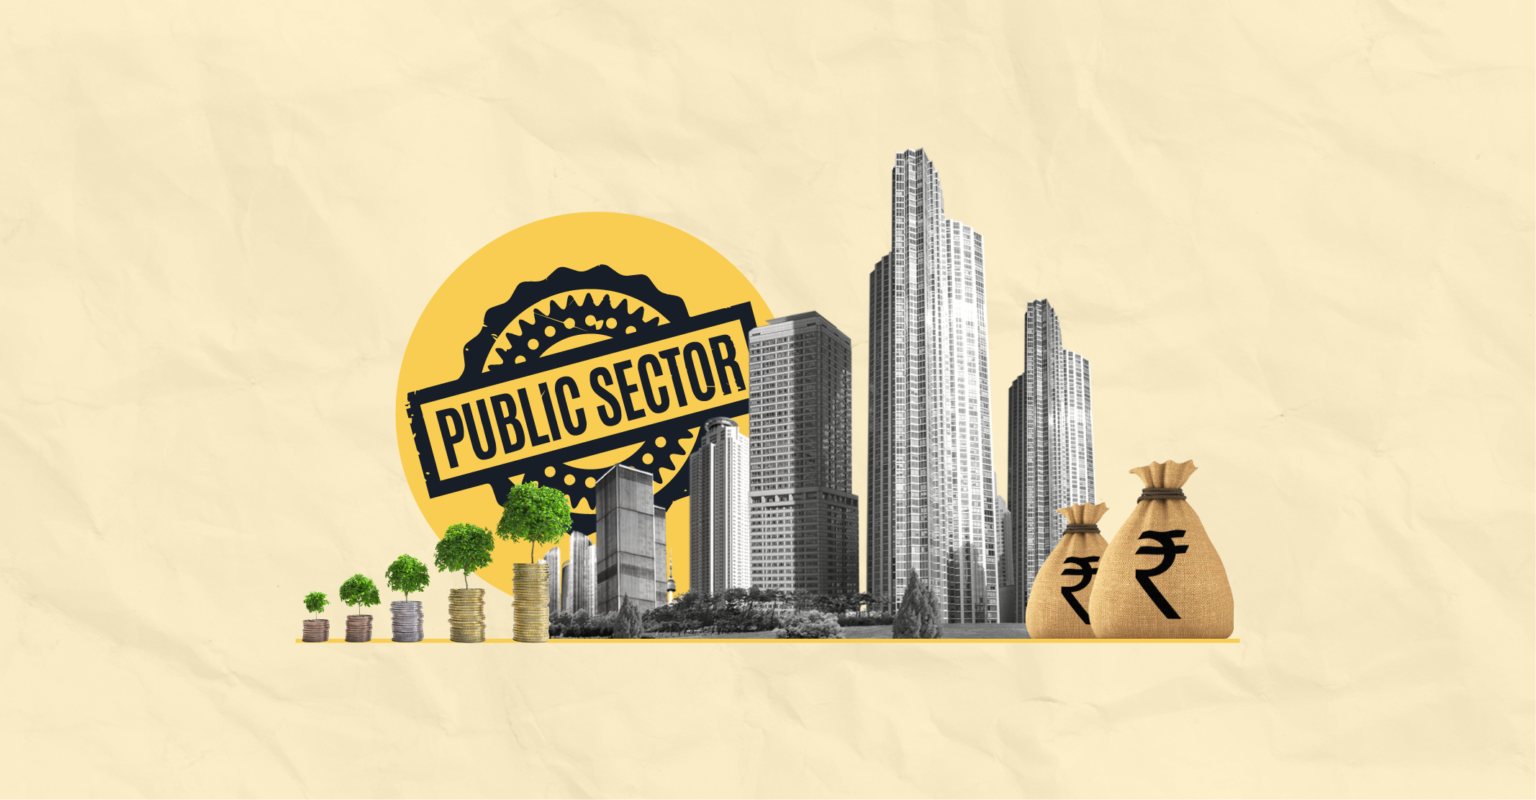 Psu Stocks Top Listed Public Sector Undertaking Stocks Based On 5 Yr Cagr Returns Blog By 0257